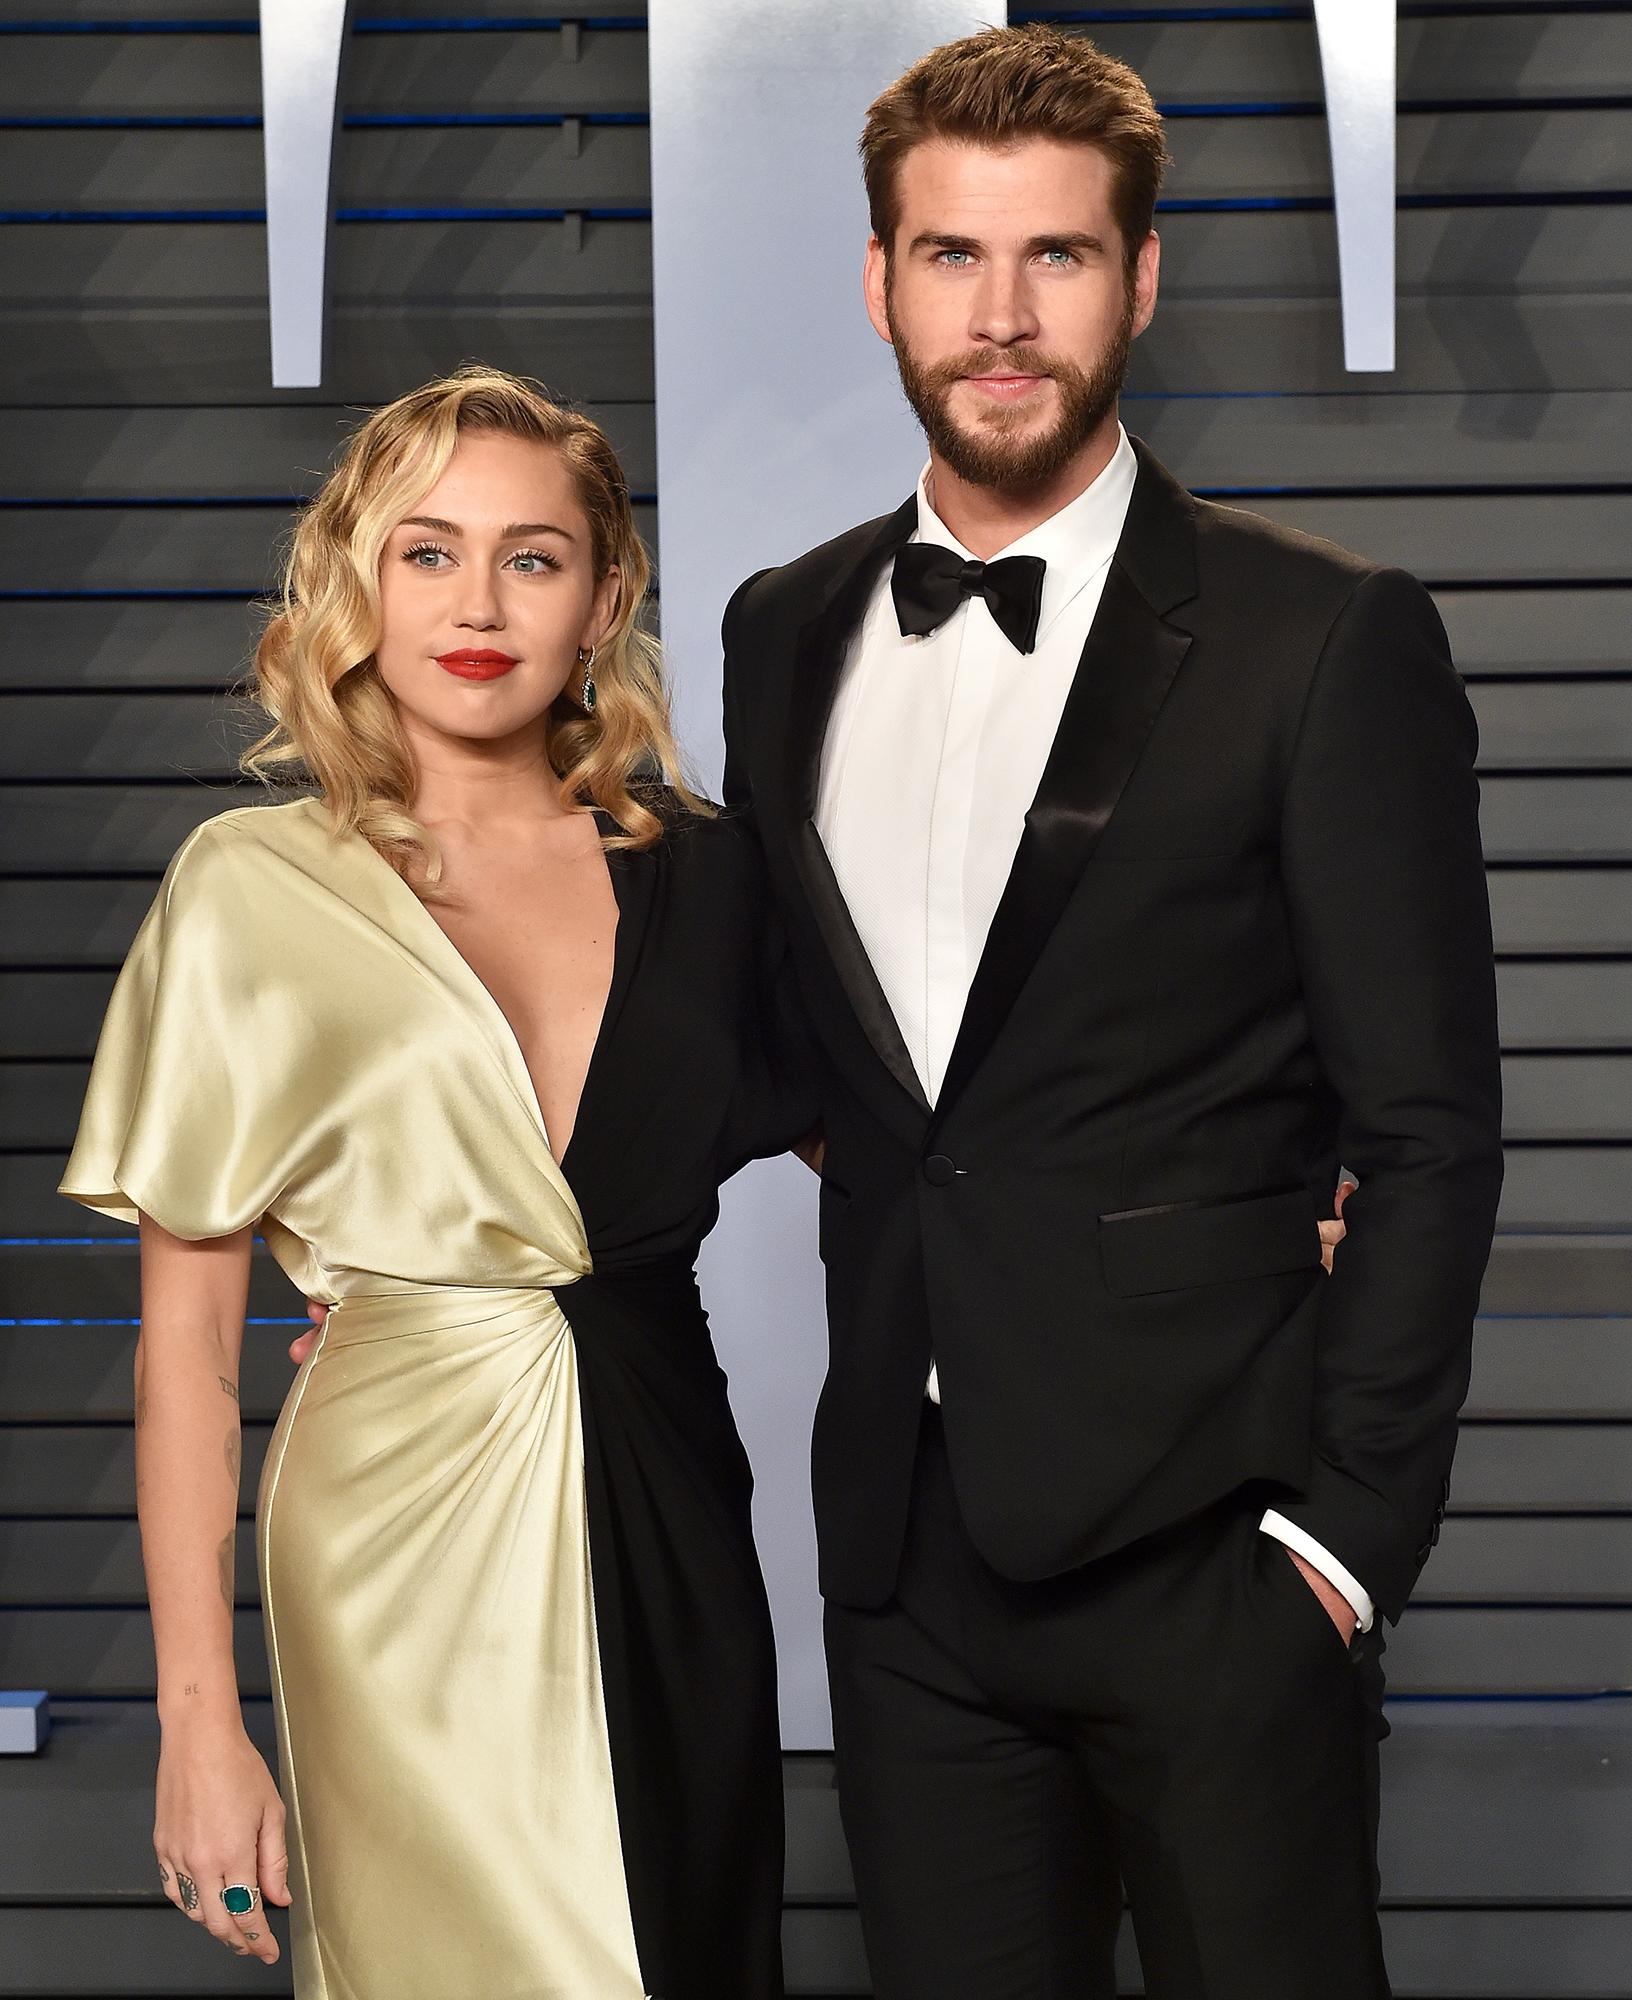 Miley Cyrus and Liam Hemsworth's Dating Timeline